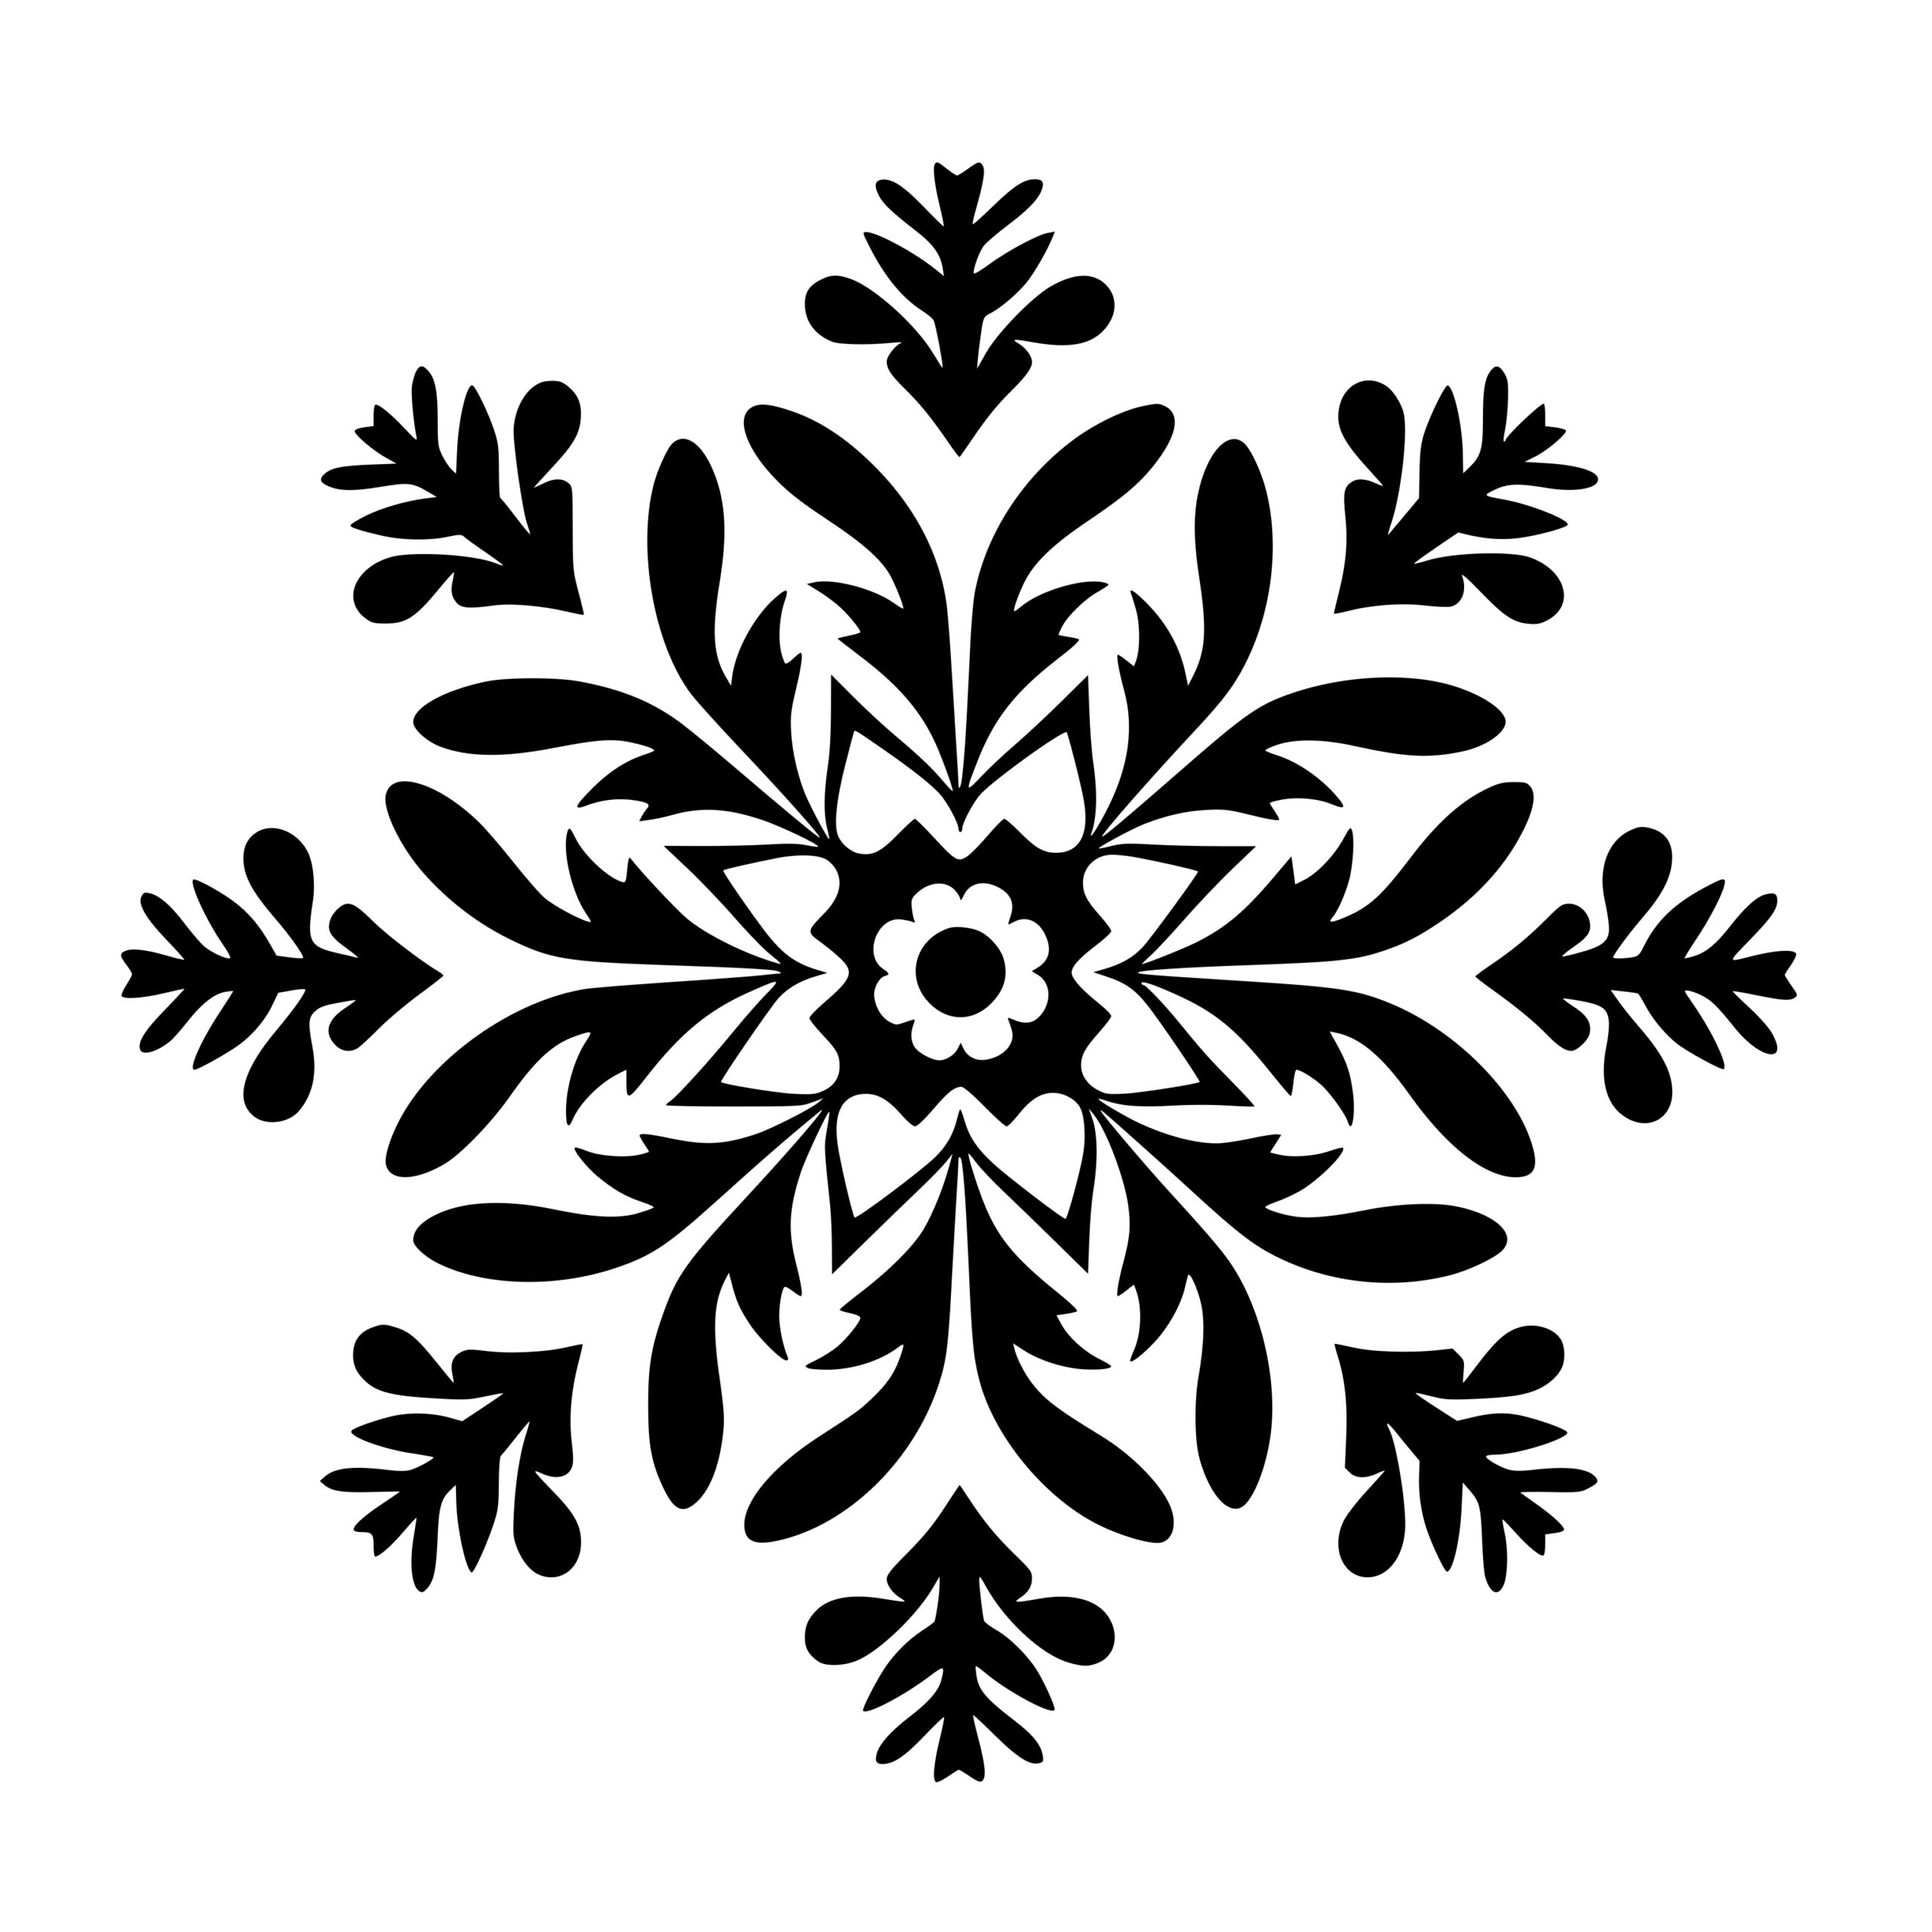 Silver Snowflake Background/Vector/Silhouette/Cameo/Cricut/Holiday  SVG/Christmas Cut File/Holiday File in SVG/New Year Graphic/Download